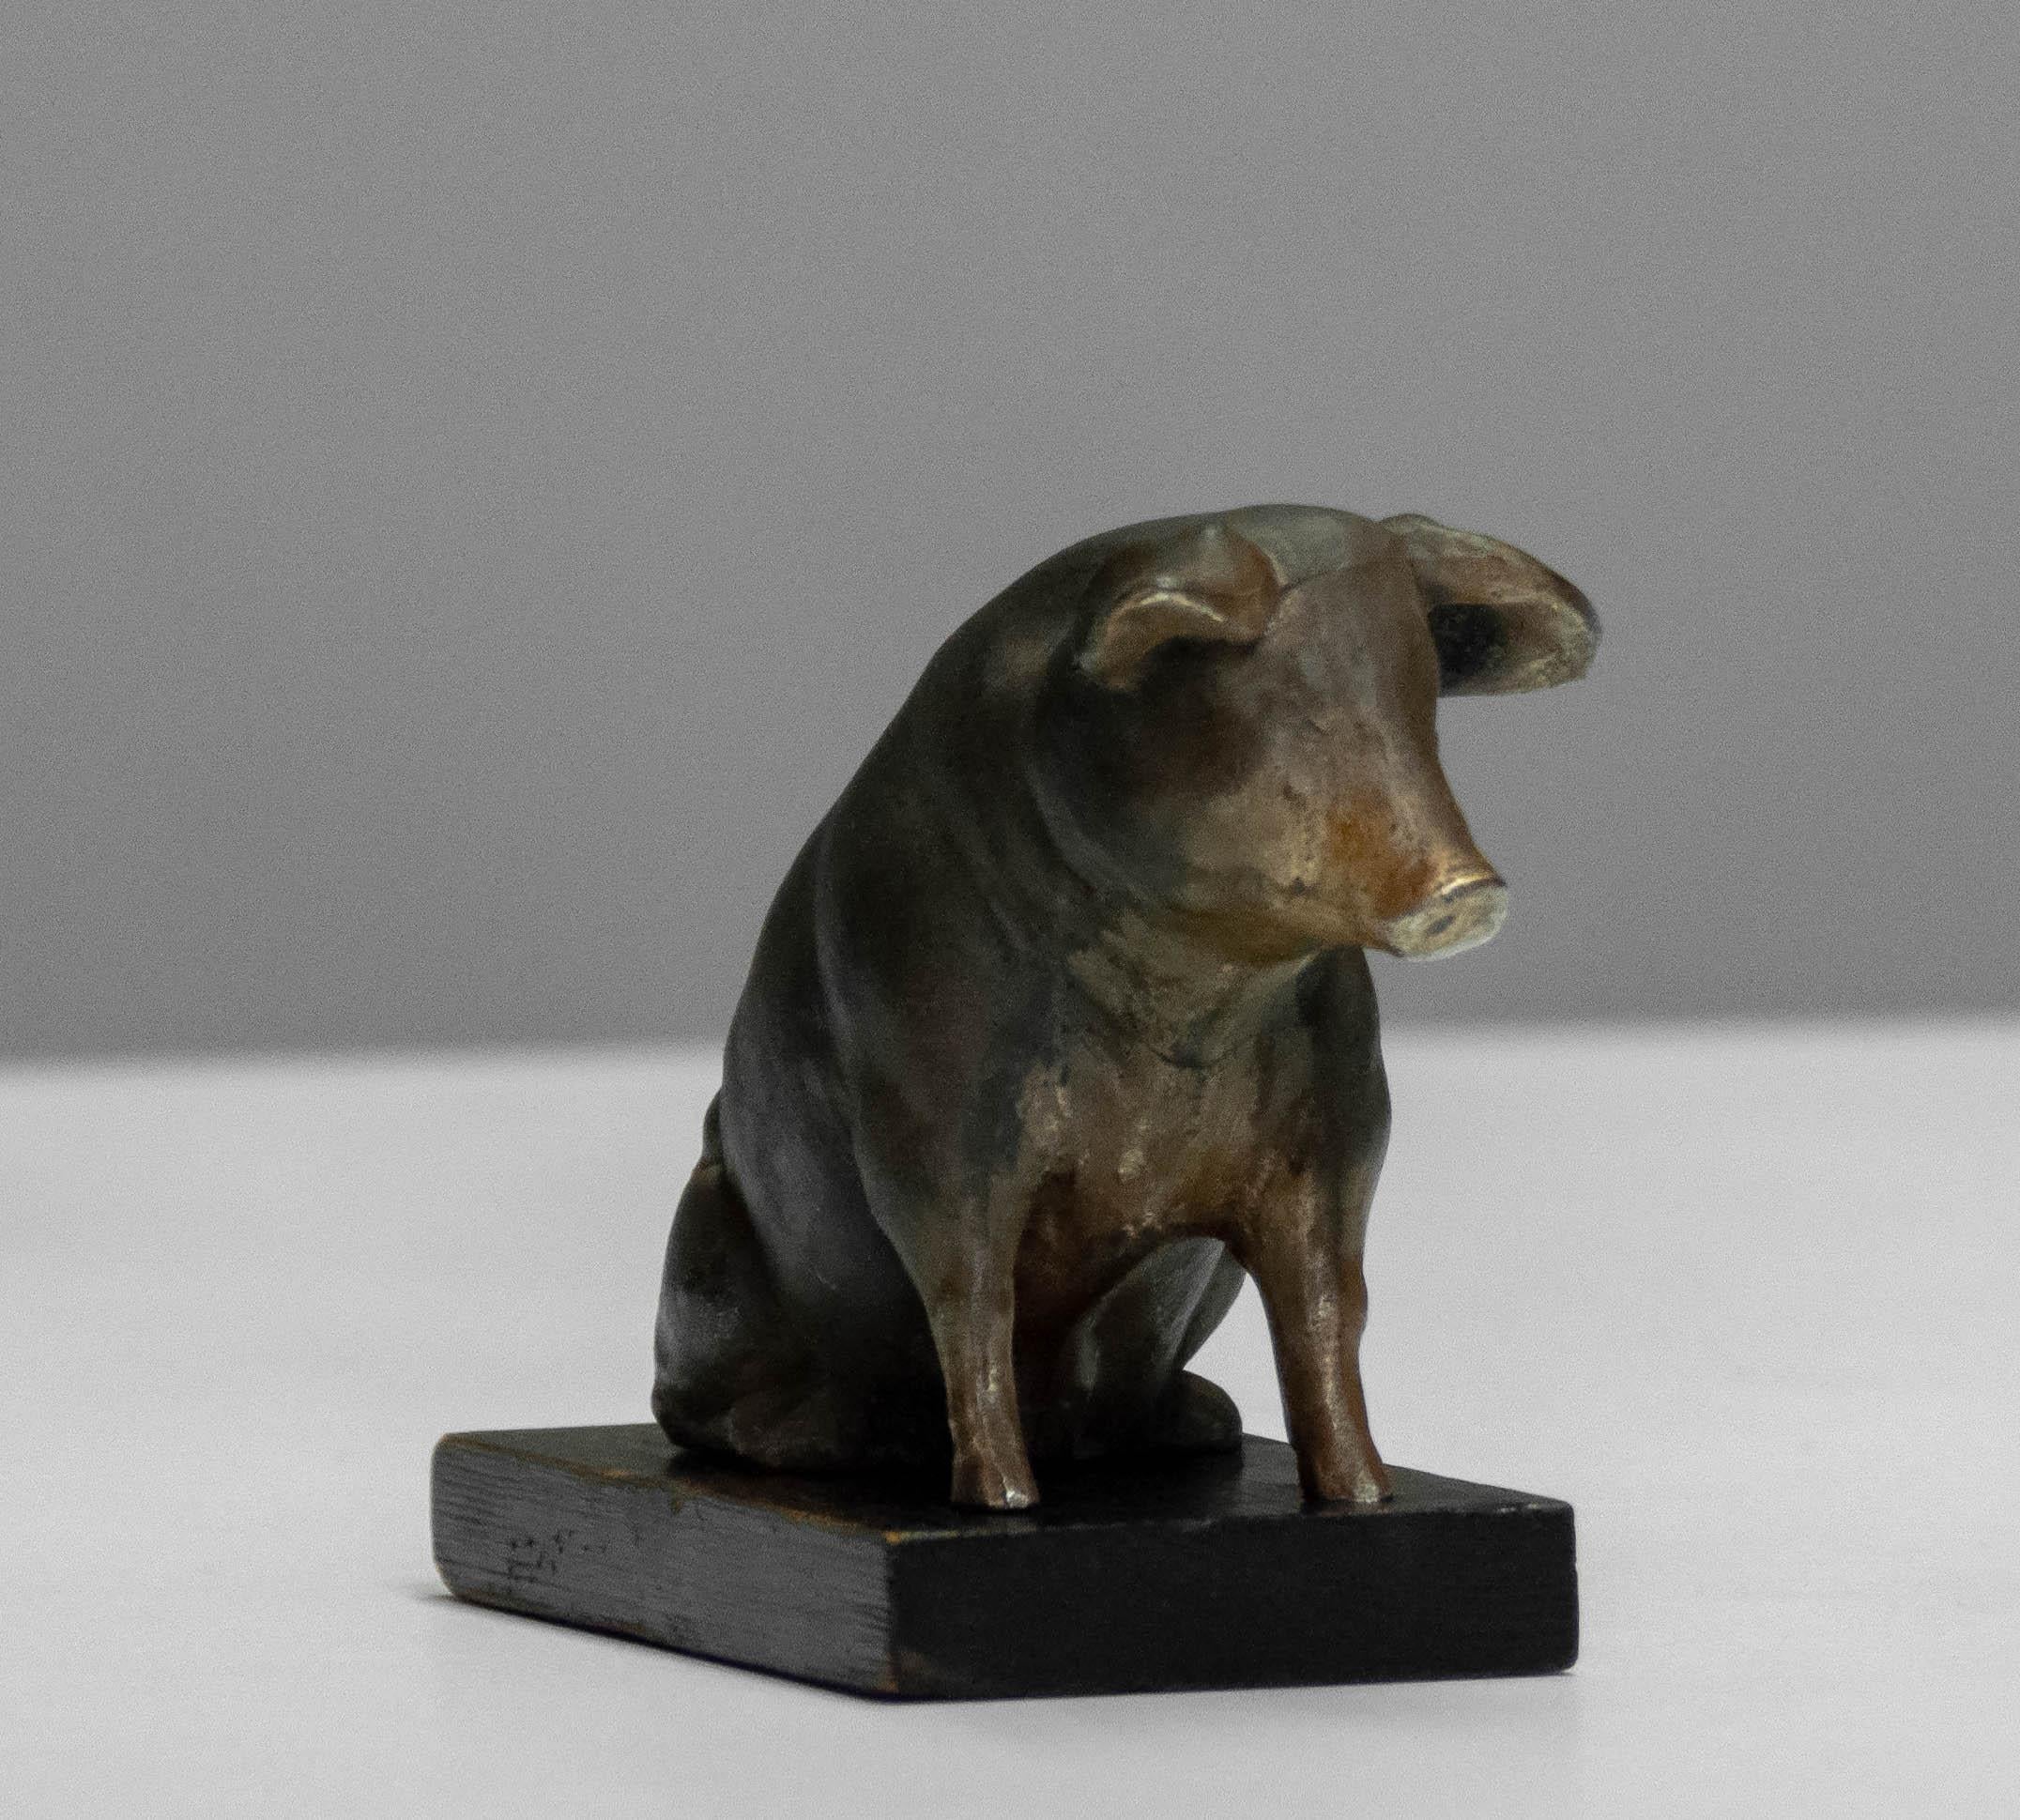 Metal 1930s Cast Saving Pig / Money Box Made by Swedish Gold Smith Olof W. Nilsson For Sale